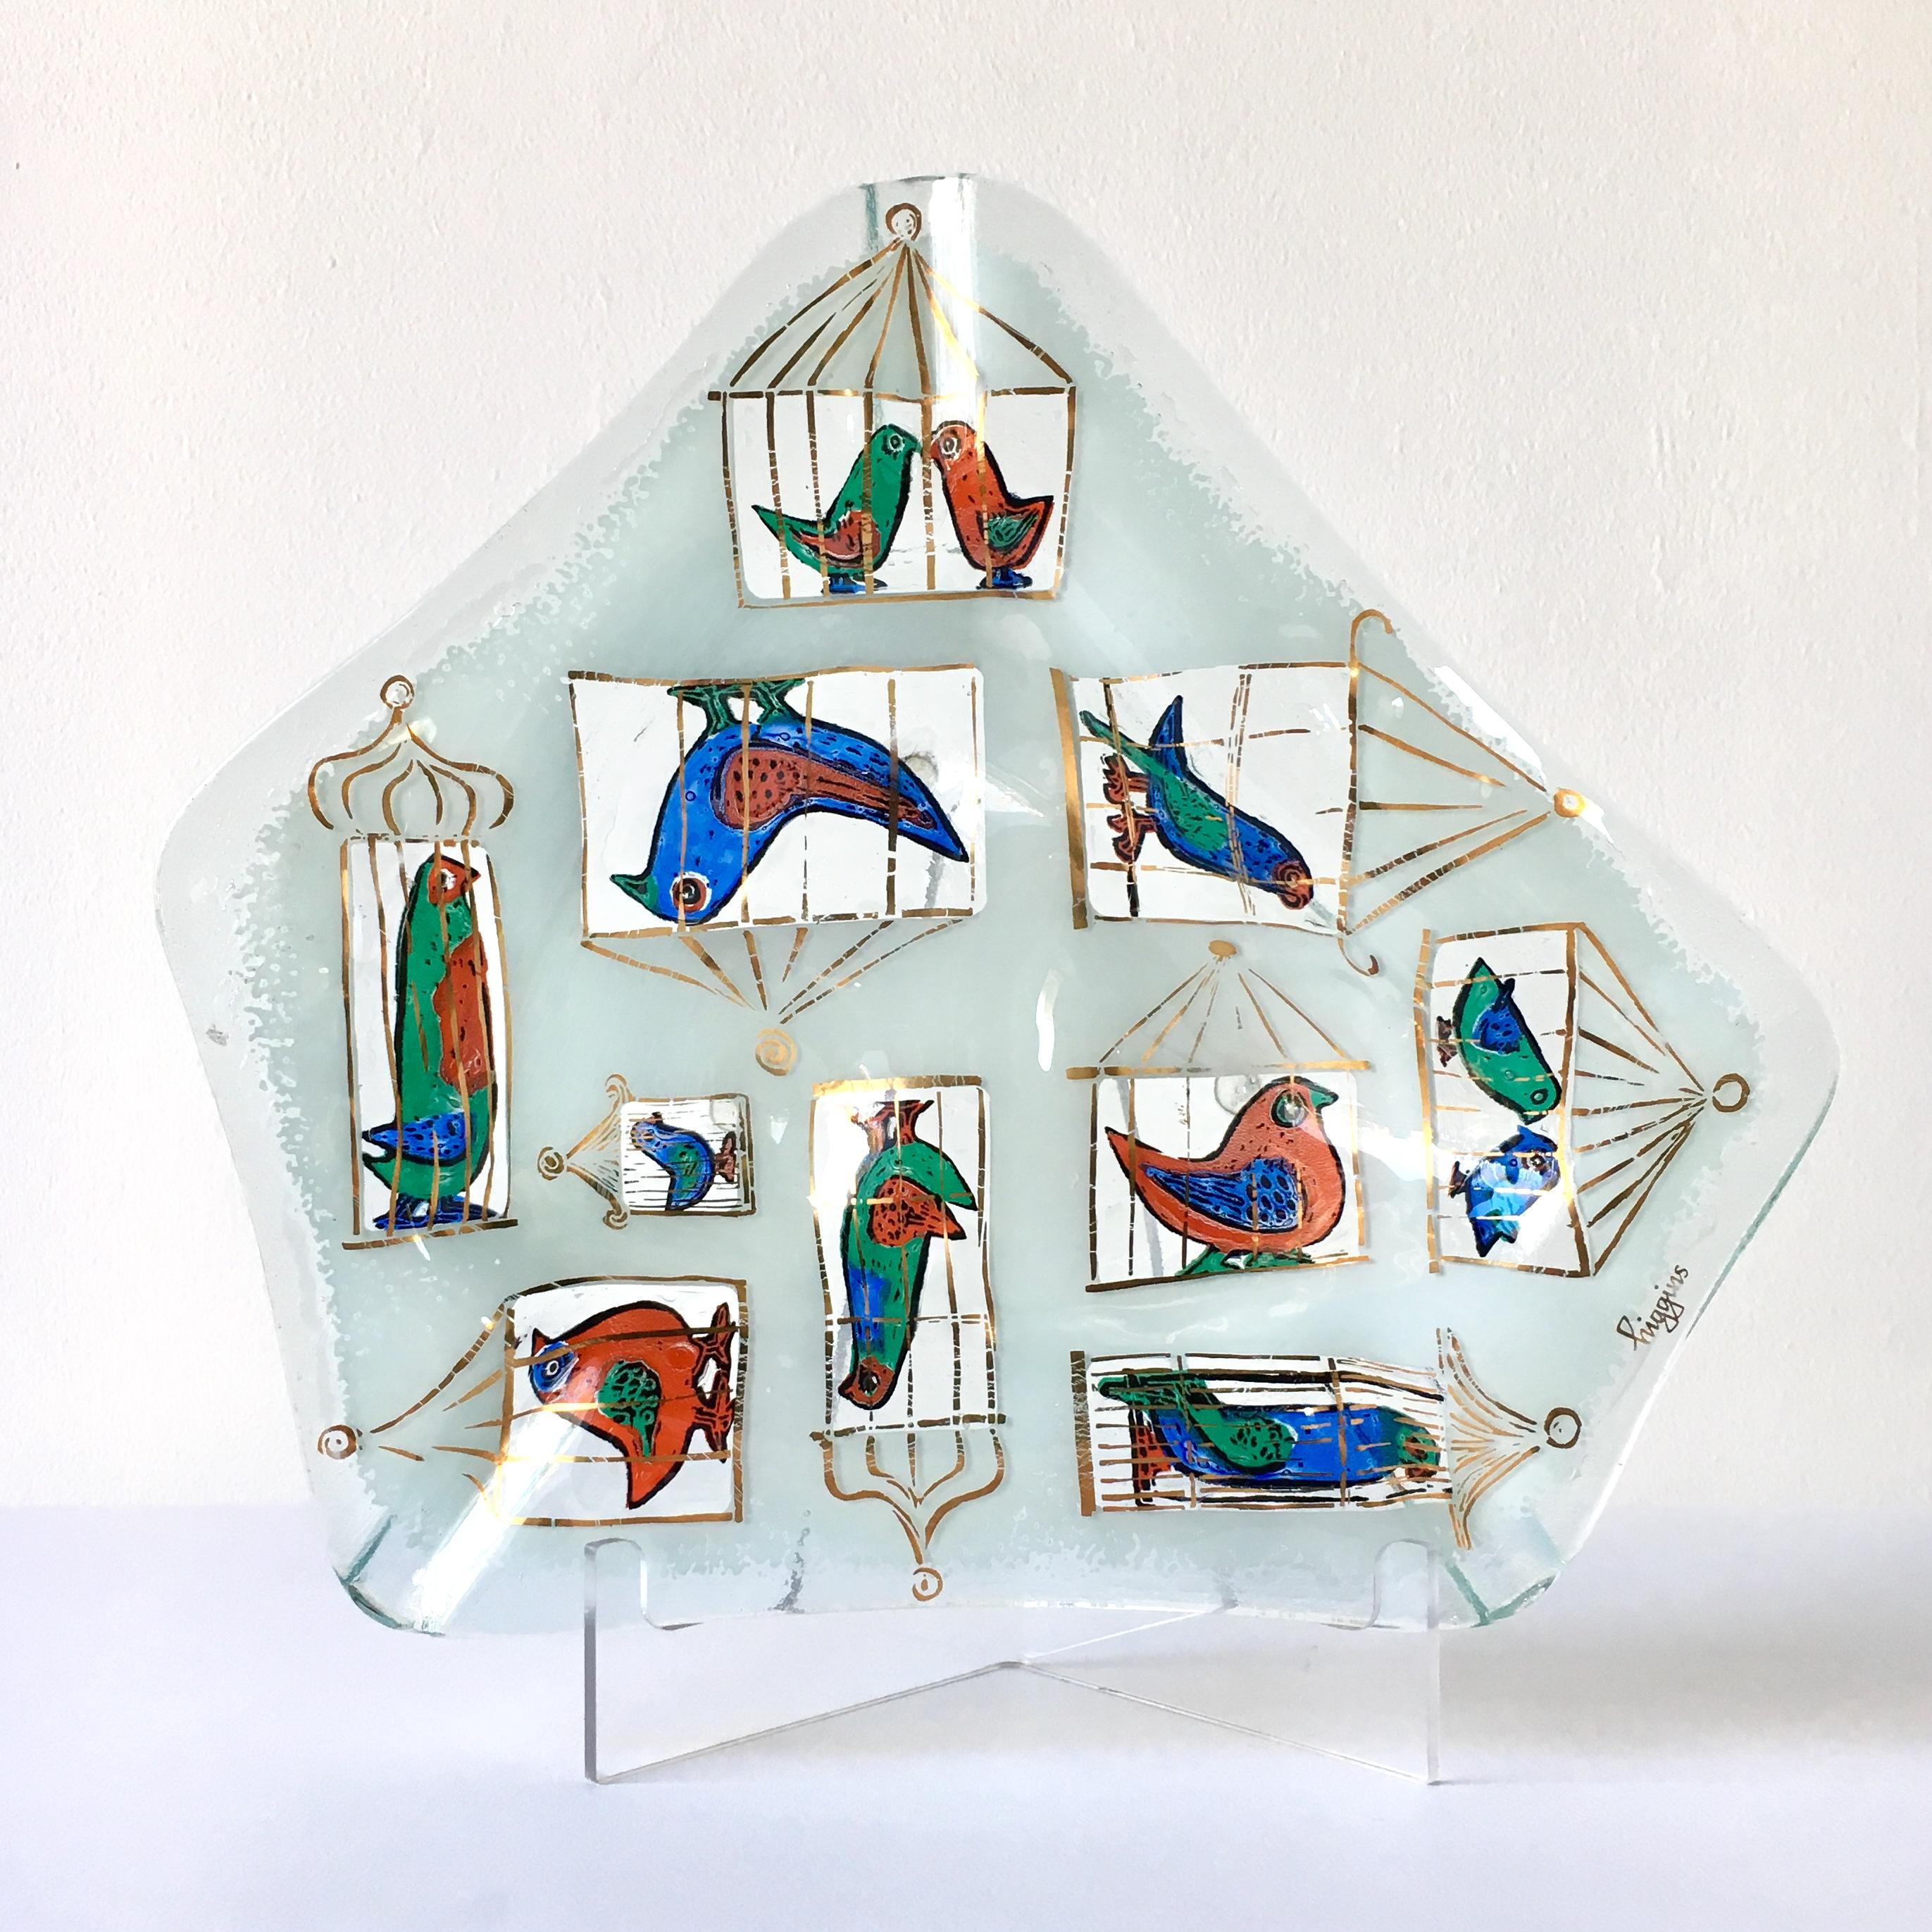 A freeform fused glass ashtray illustrating birdcages by Michael and Frances Higgins, USA, 1957-1965.

Michael Higgins (1908-1999) and Frances Higgins (1912-2004) met in Chicago and were married in 1948. They had a fascination of modern glass